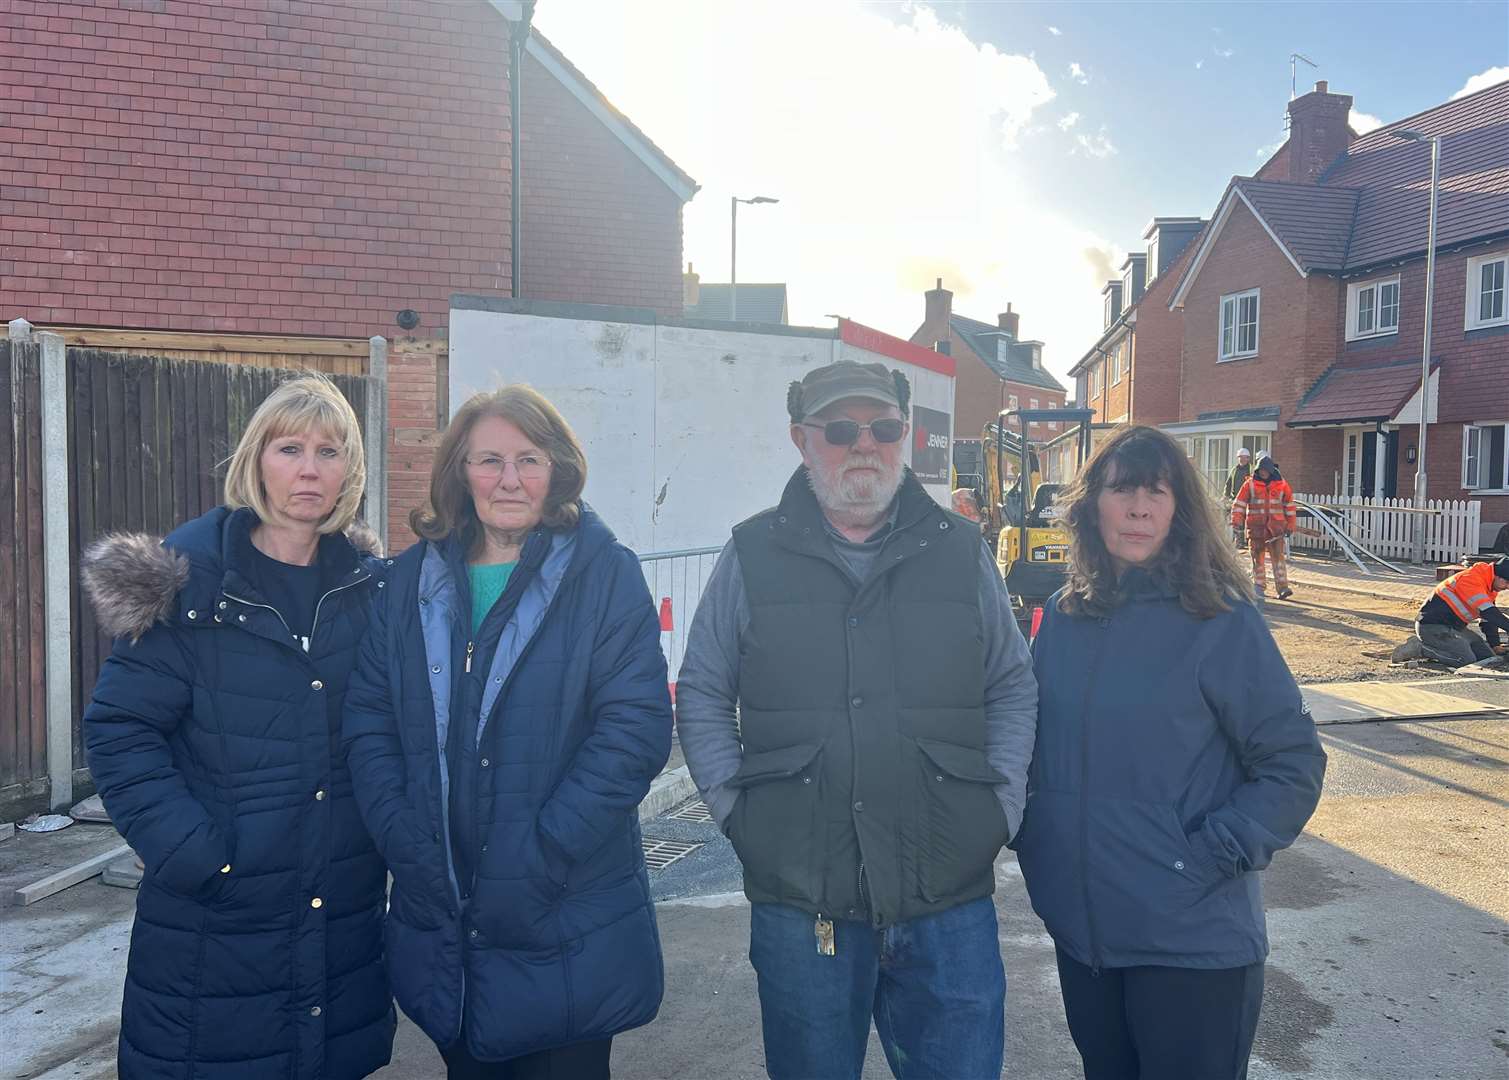 Jo Webb, of Adelaide Drive, and Lydbrook Close residents Ann Smith, Thomas and Janice Cherrett standing in front of the new Moat Homes estate in Sittingbourne